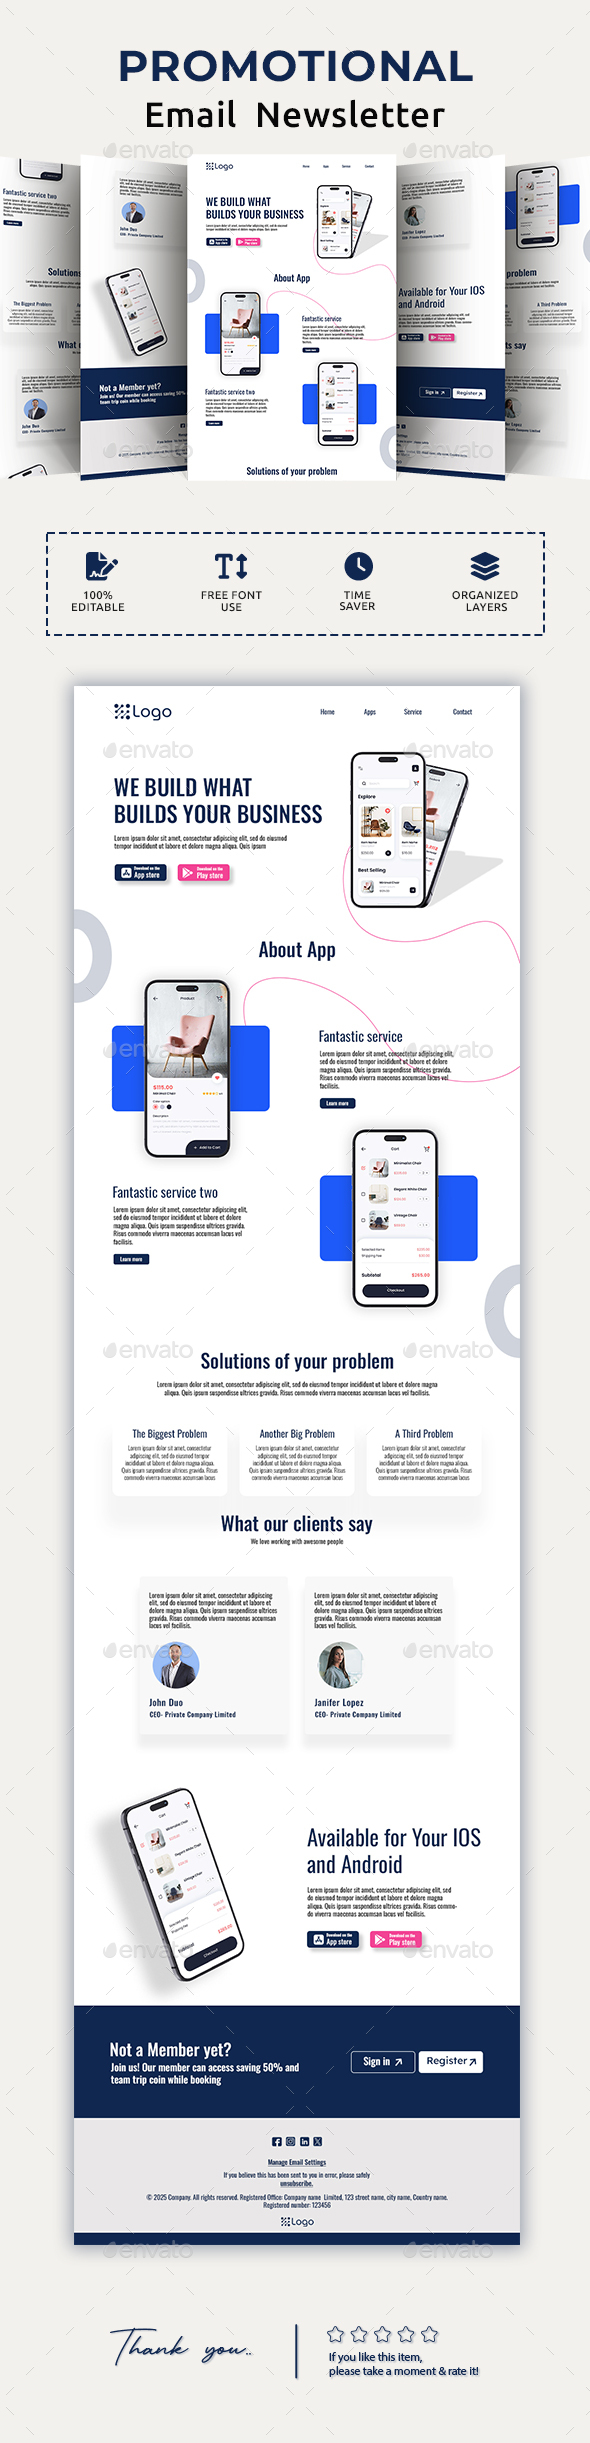 [DOWNLOAD]Mobile Apps Email Newsletter PSD Template